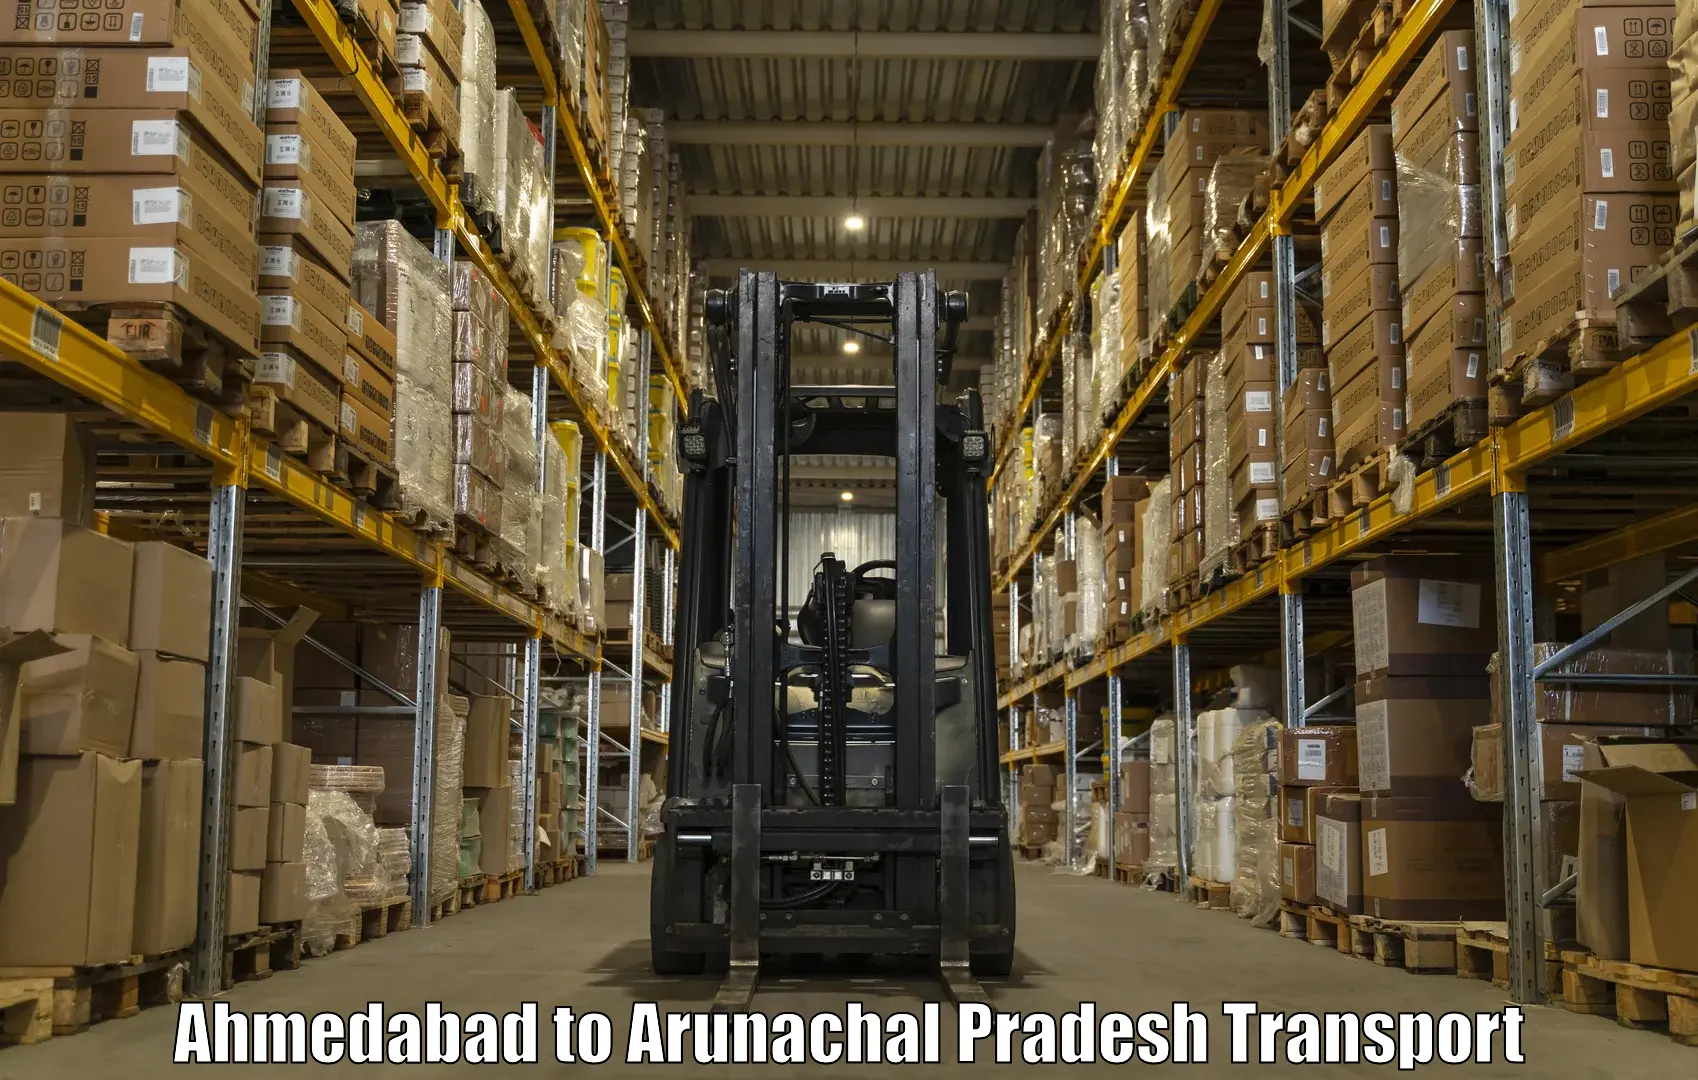 Truck transport companies in India Ahmedabad to Bomdila